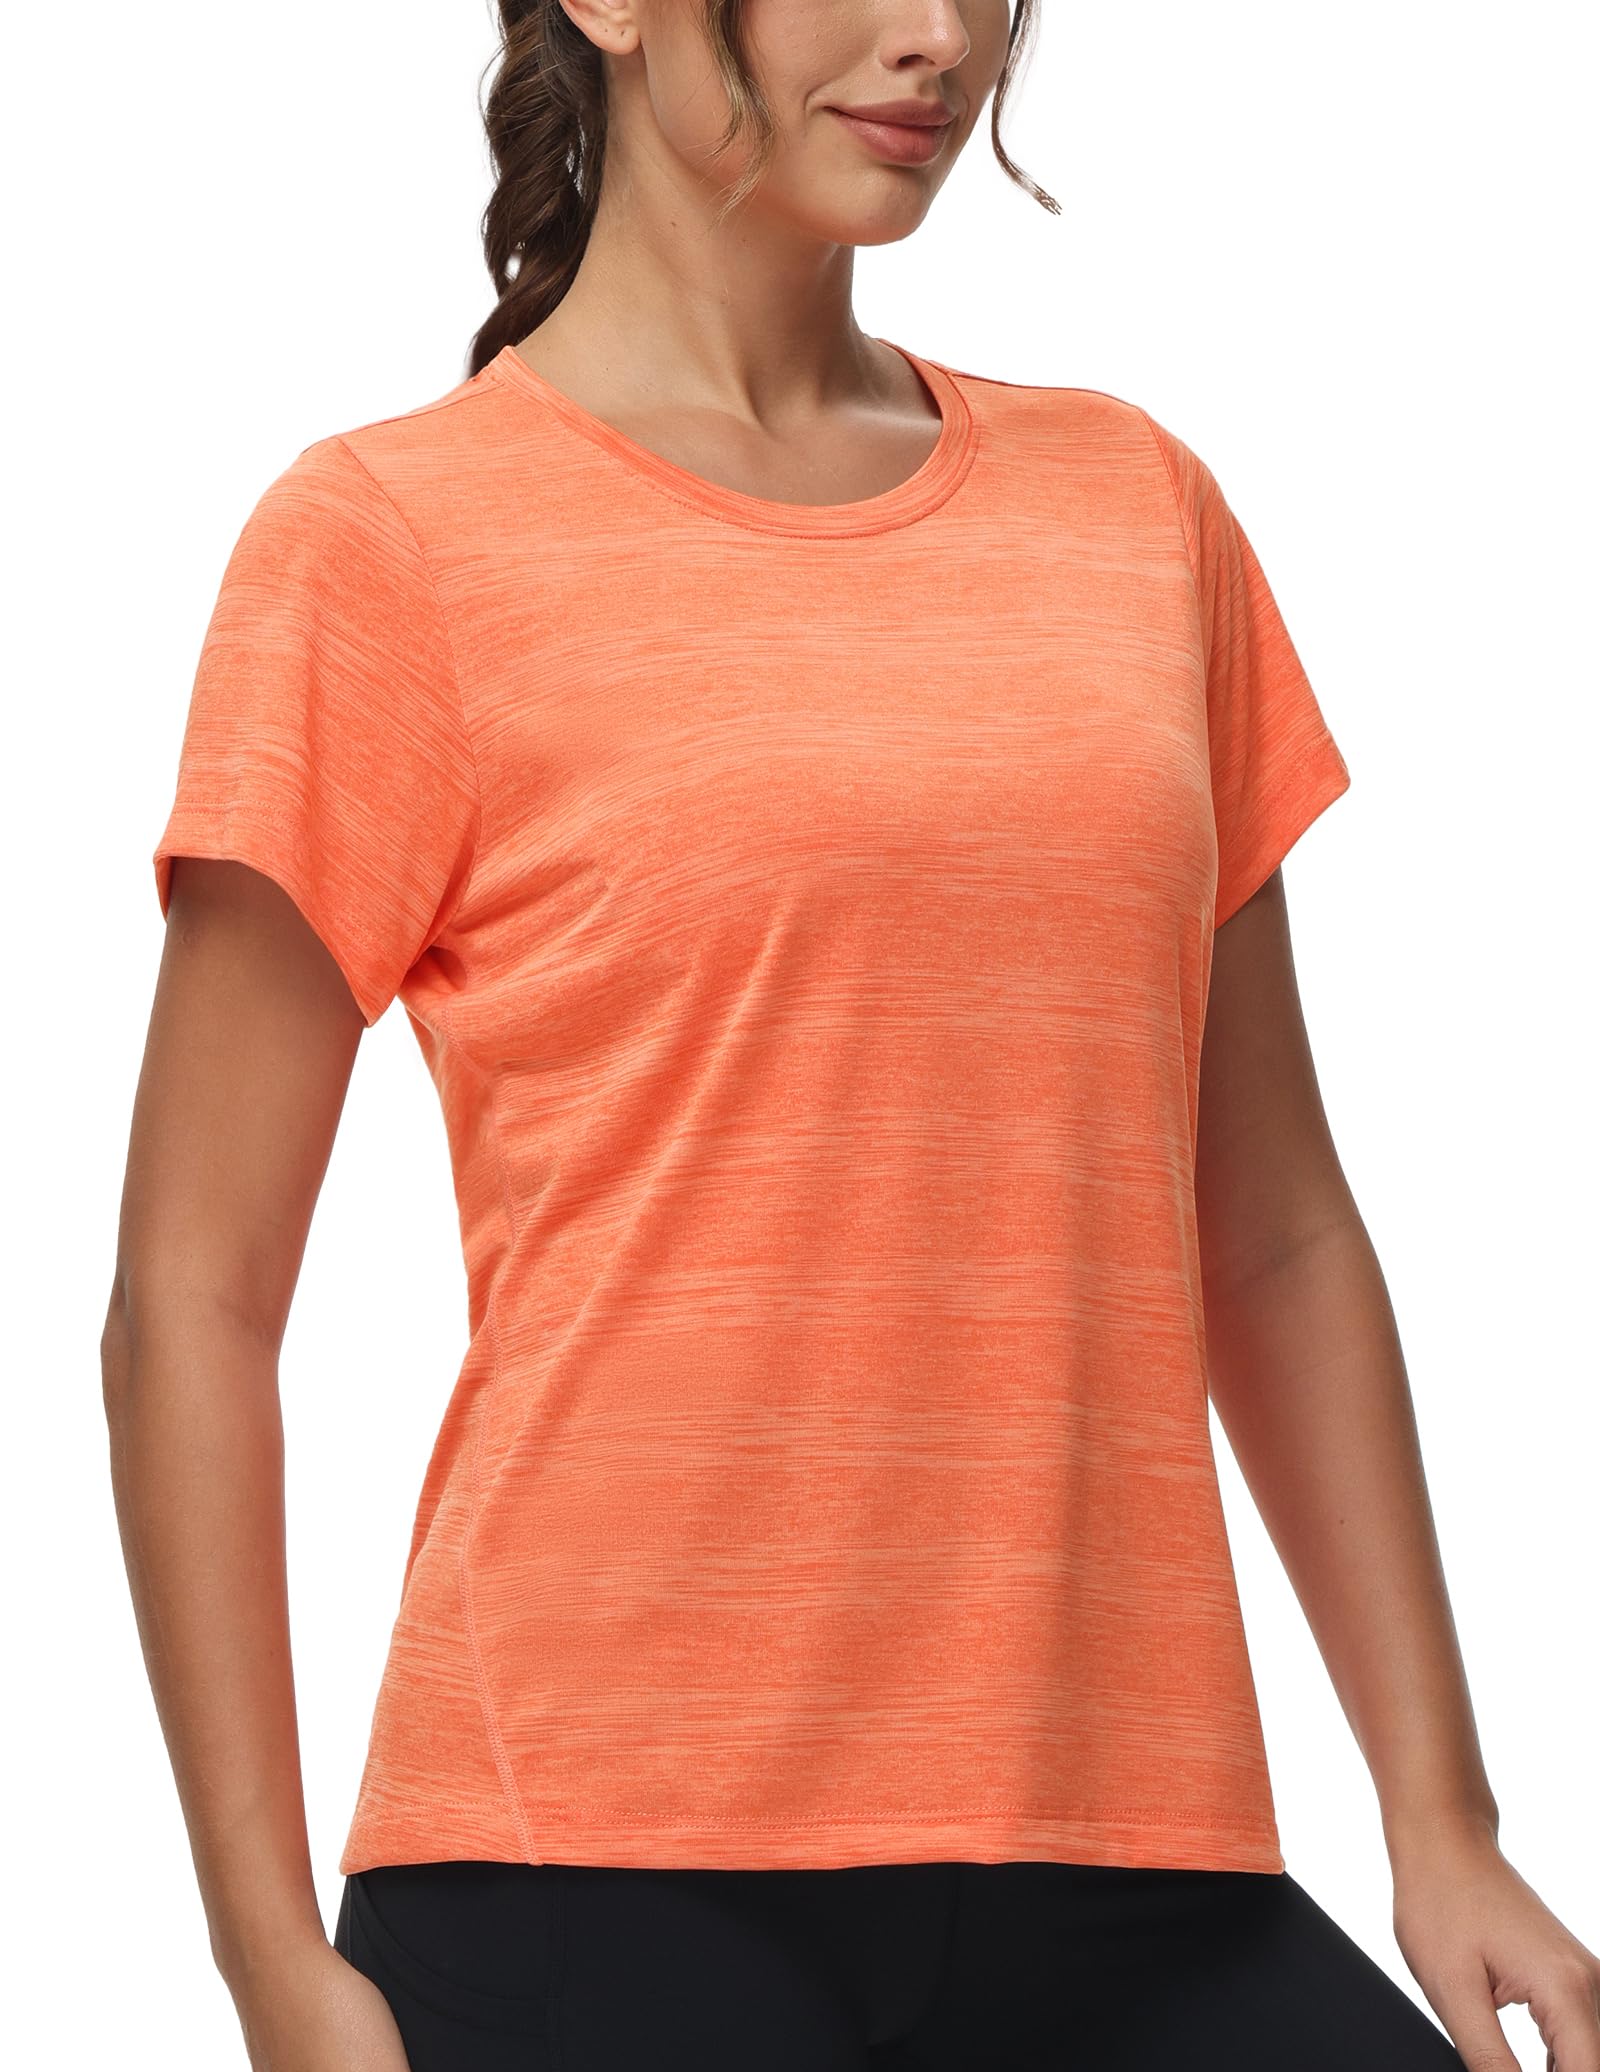 Women's Running Athletic Shirts Dry Fit Active T-Shirt